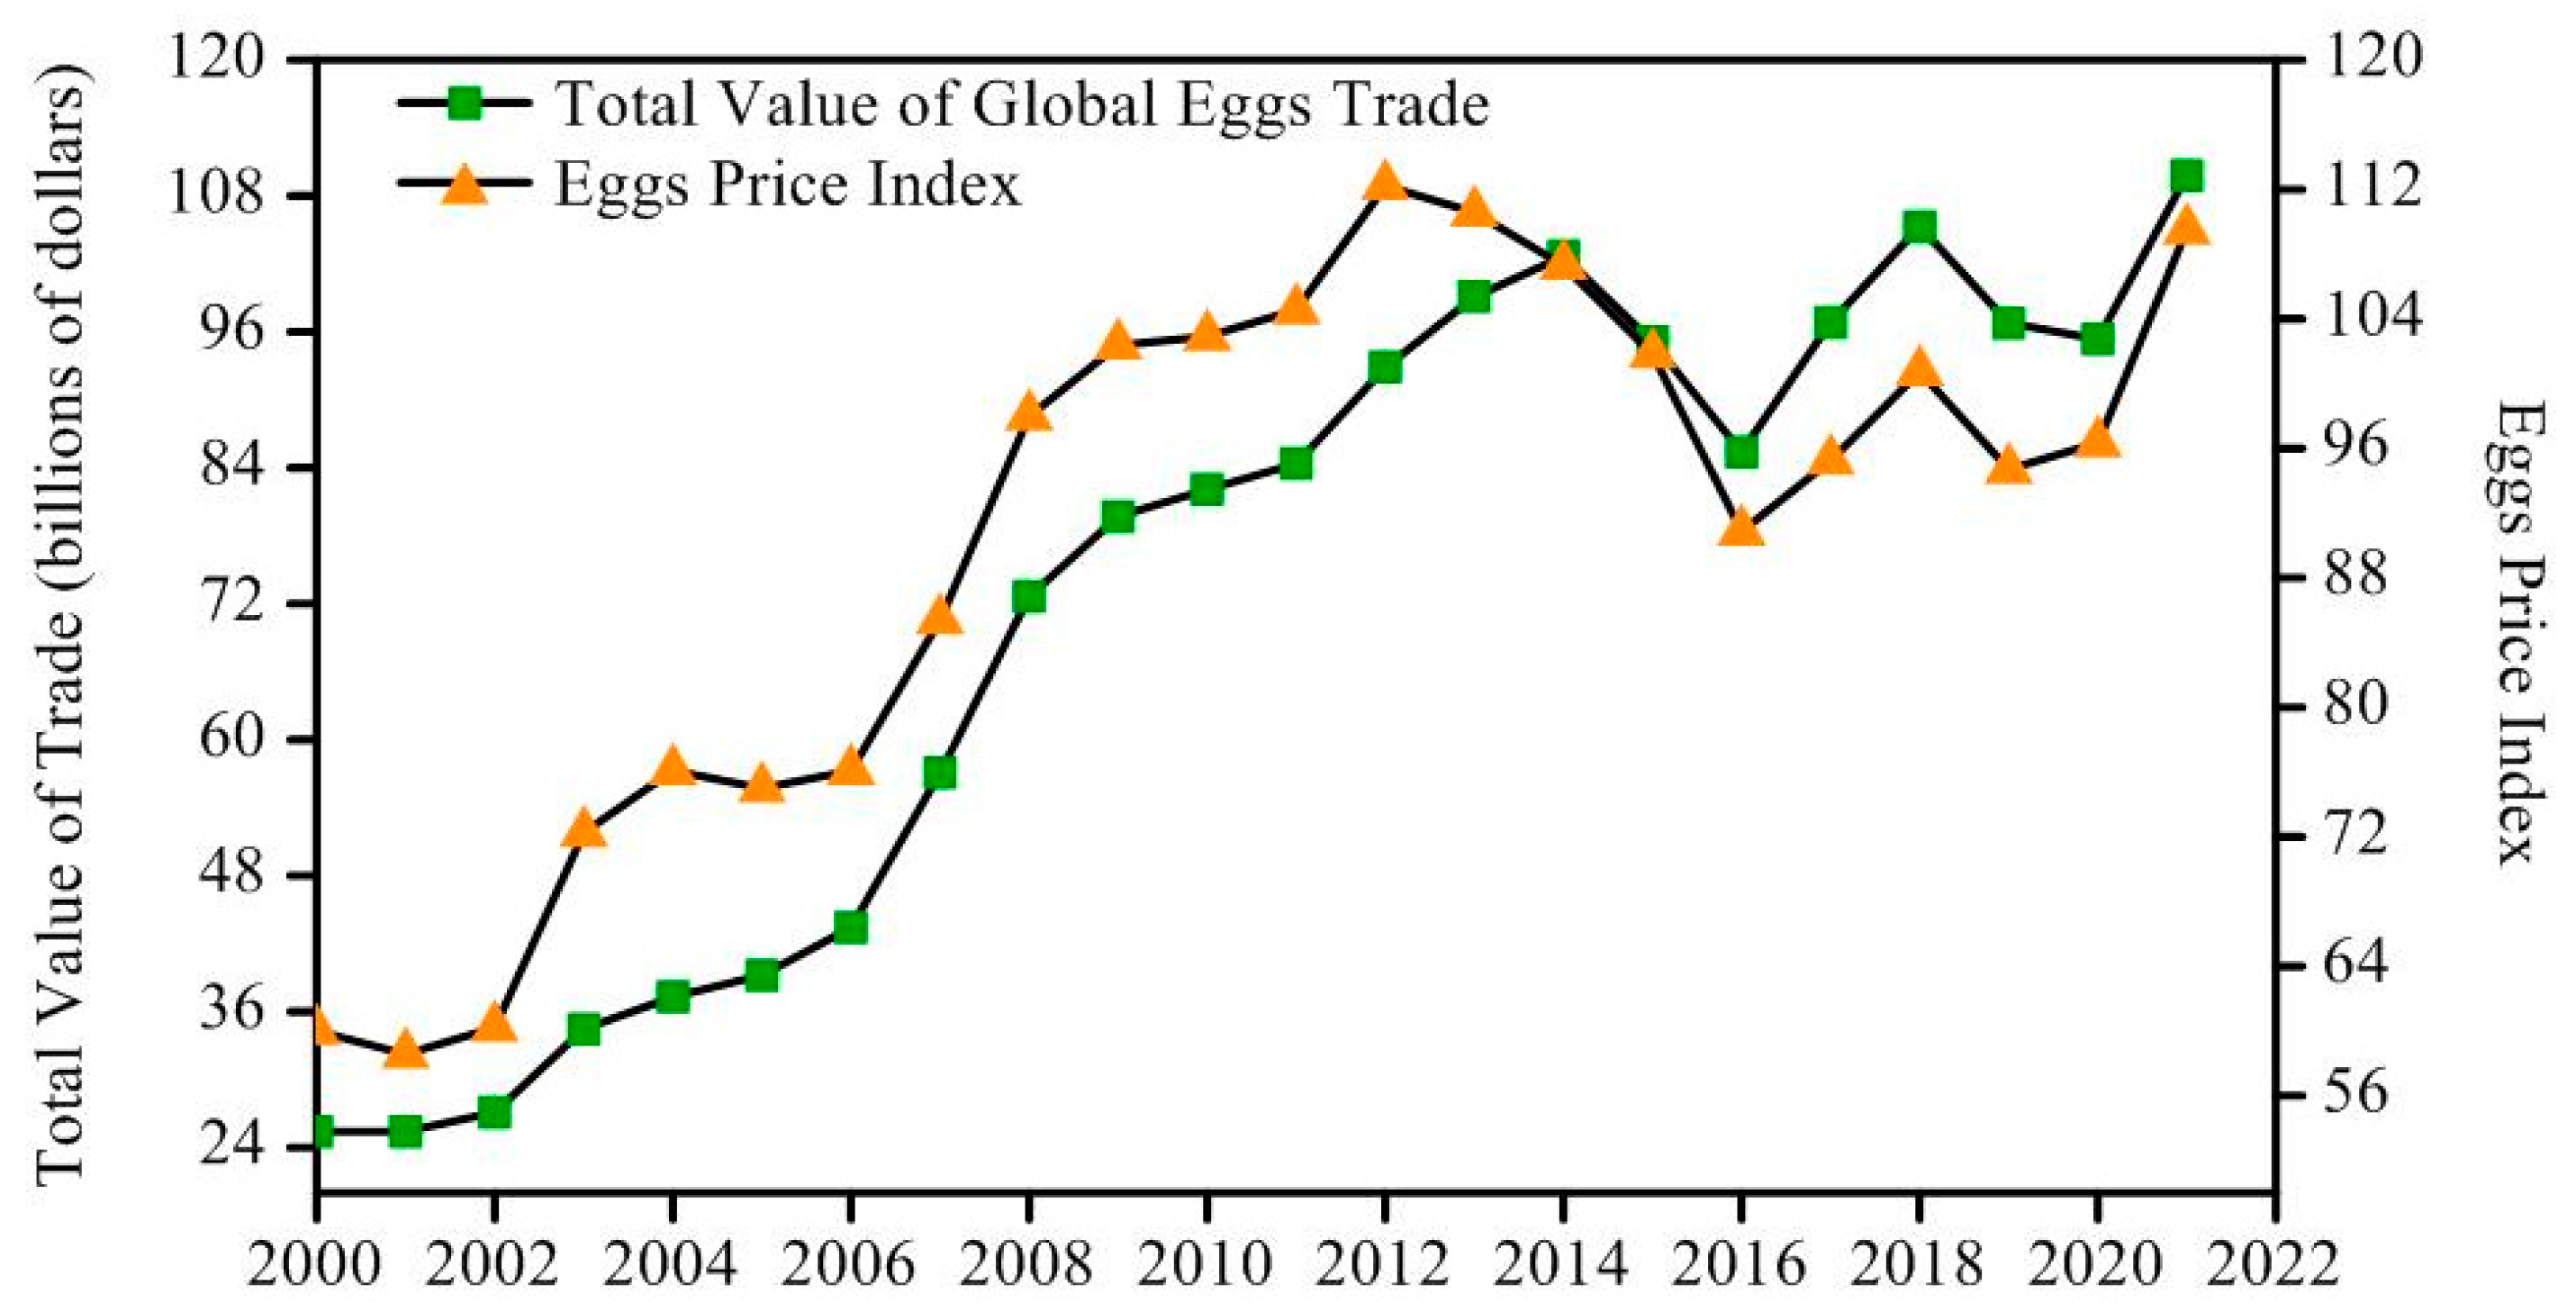 LV also prices the United States , France and Italy, 2010-2012